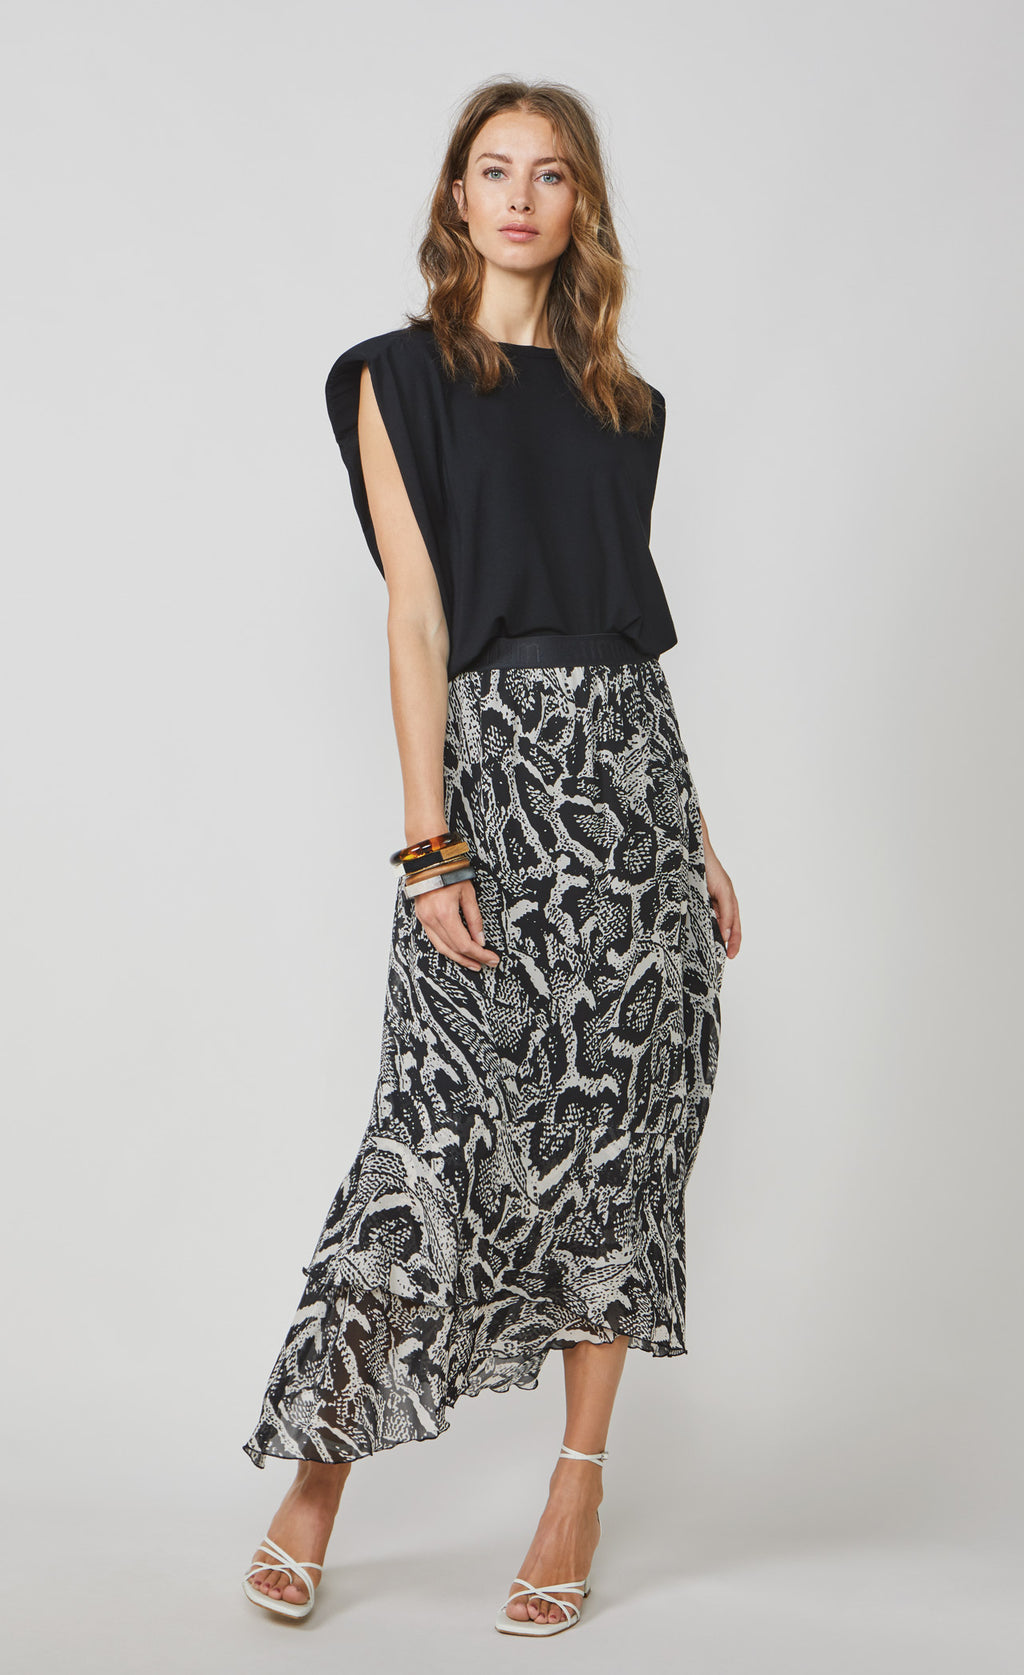 Front full body view of a woman wearing the summum black shoulder pad top and the summum printed maxi skirt. This skirt has a black and white snake skin print with a black waistband. The skirt has an asymmetrical hem and a flowy look.